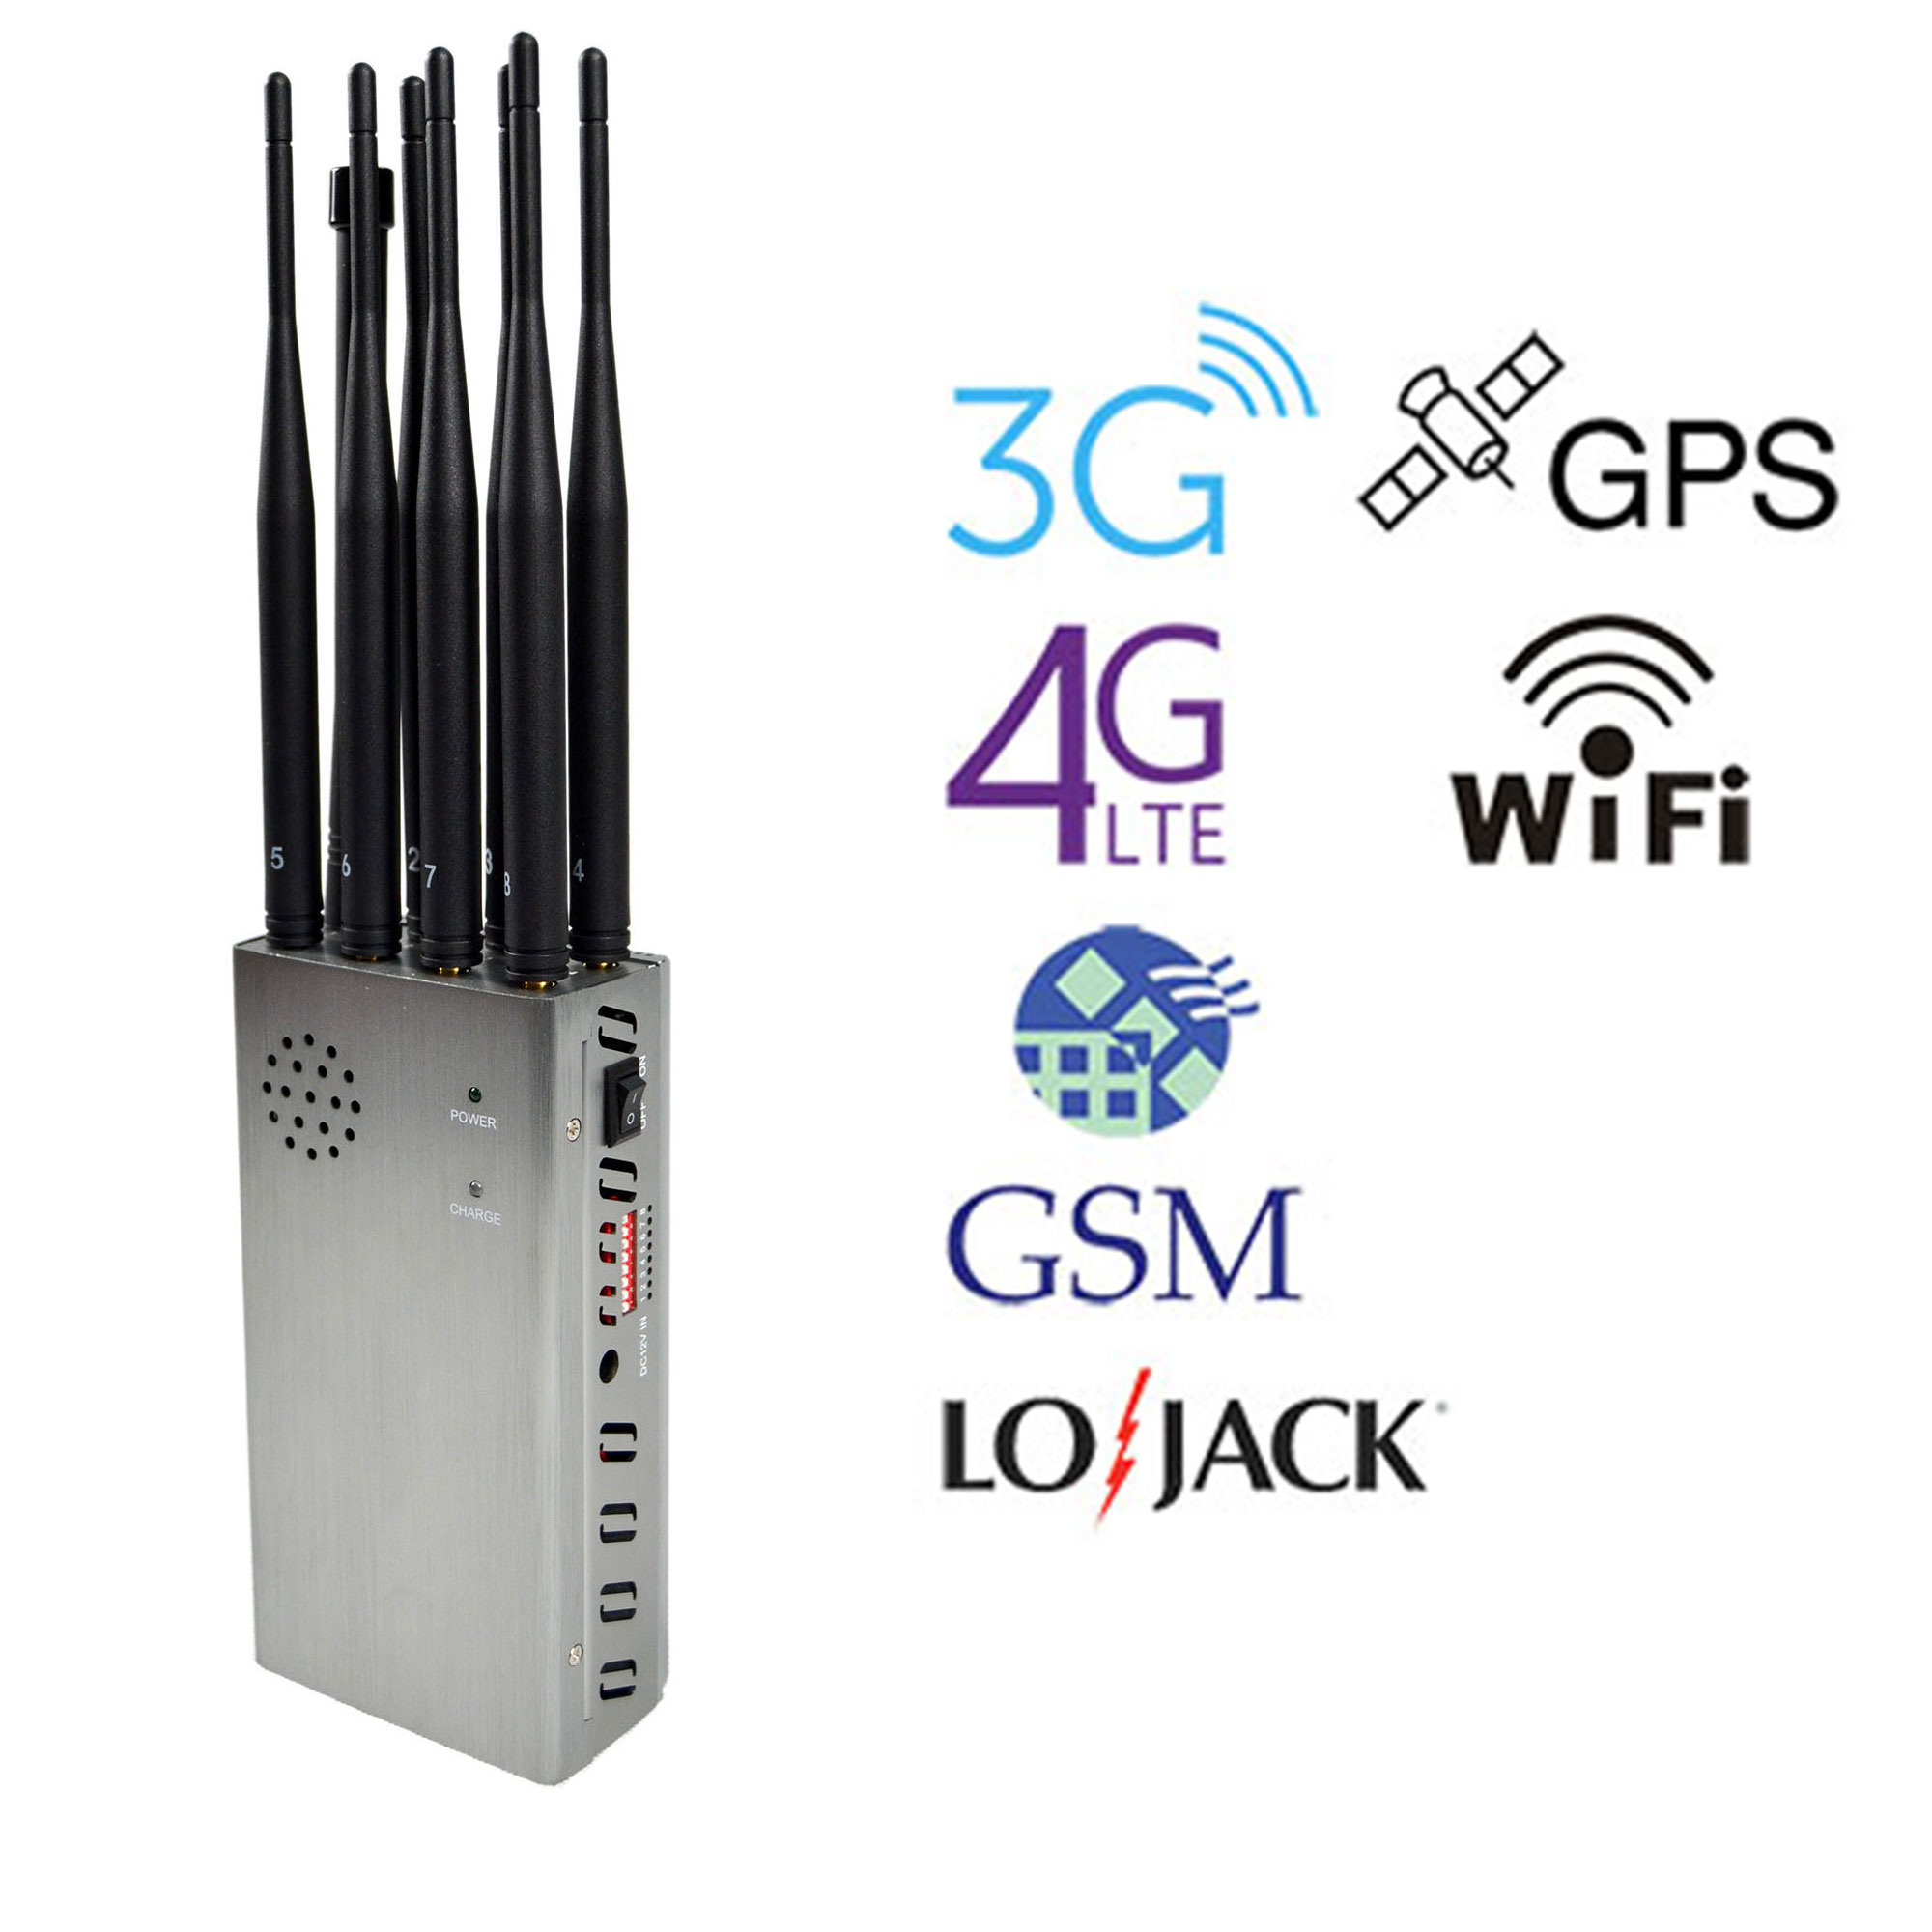 jammer nut bread pudding | Portable 8 Antennas Cell Phone Jammers With 2g 3G 4G And LOJACK GPS WIFI Signals